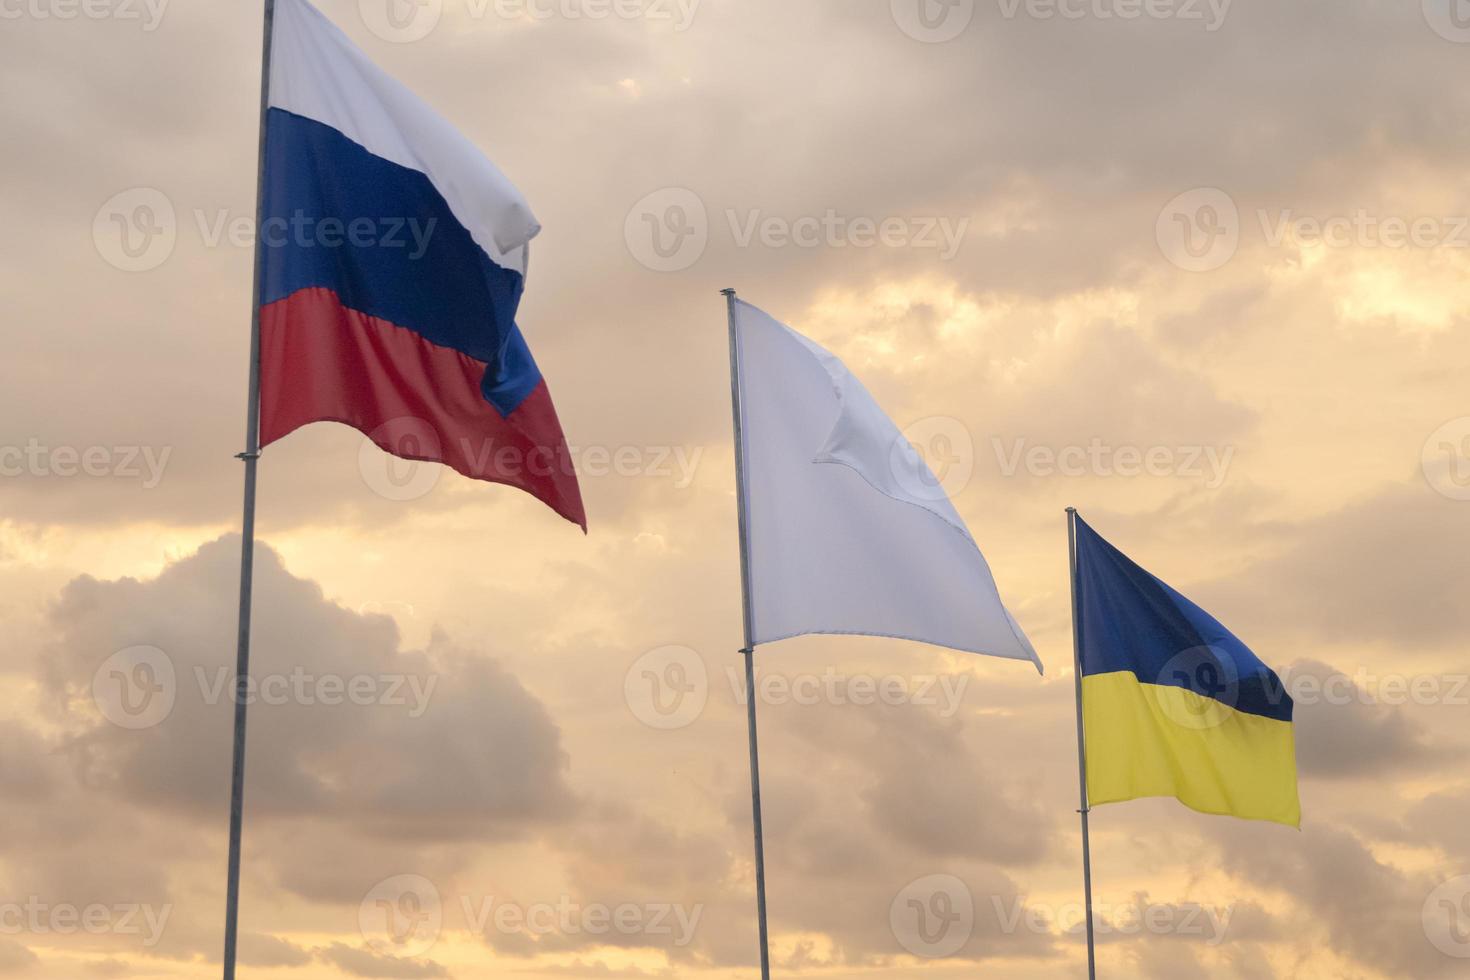 Flags waving at sunset. Russia and Ukraine. photo